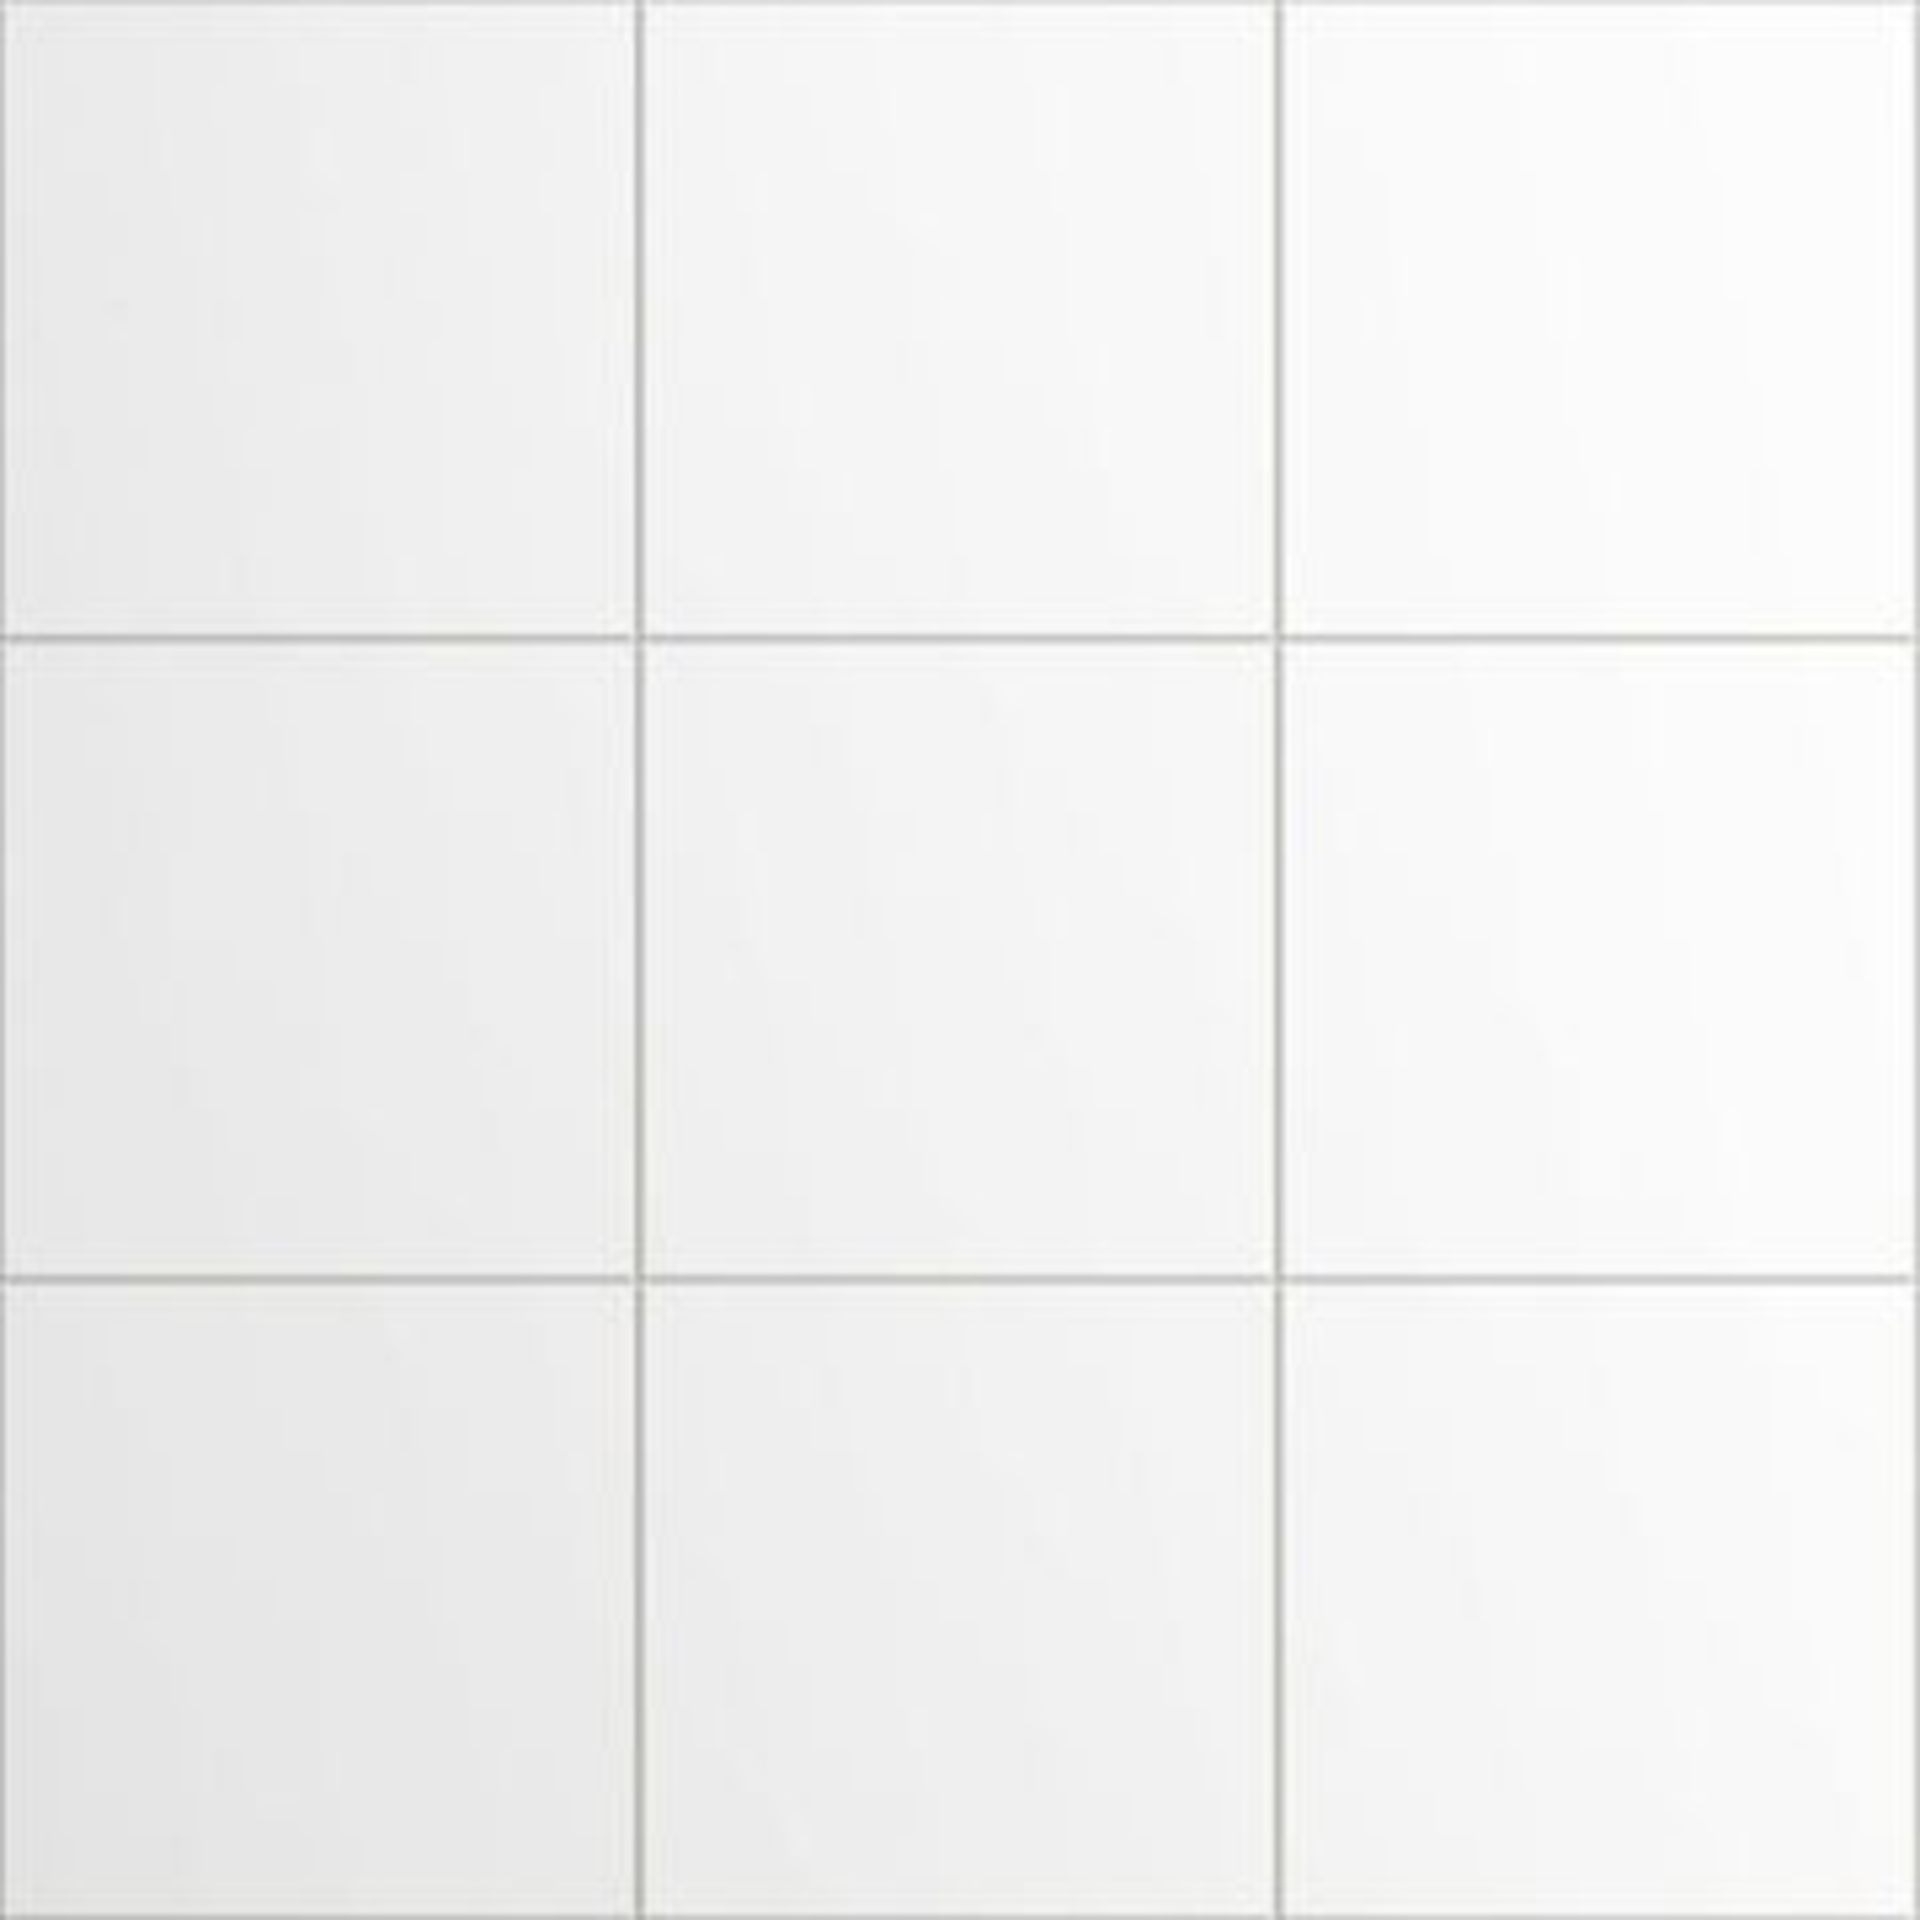 6m2 150x150mm White Square Procelian wall Tiles. White tiles are an essential product that is ... - Image 4 of 4